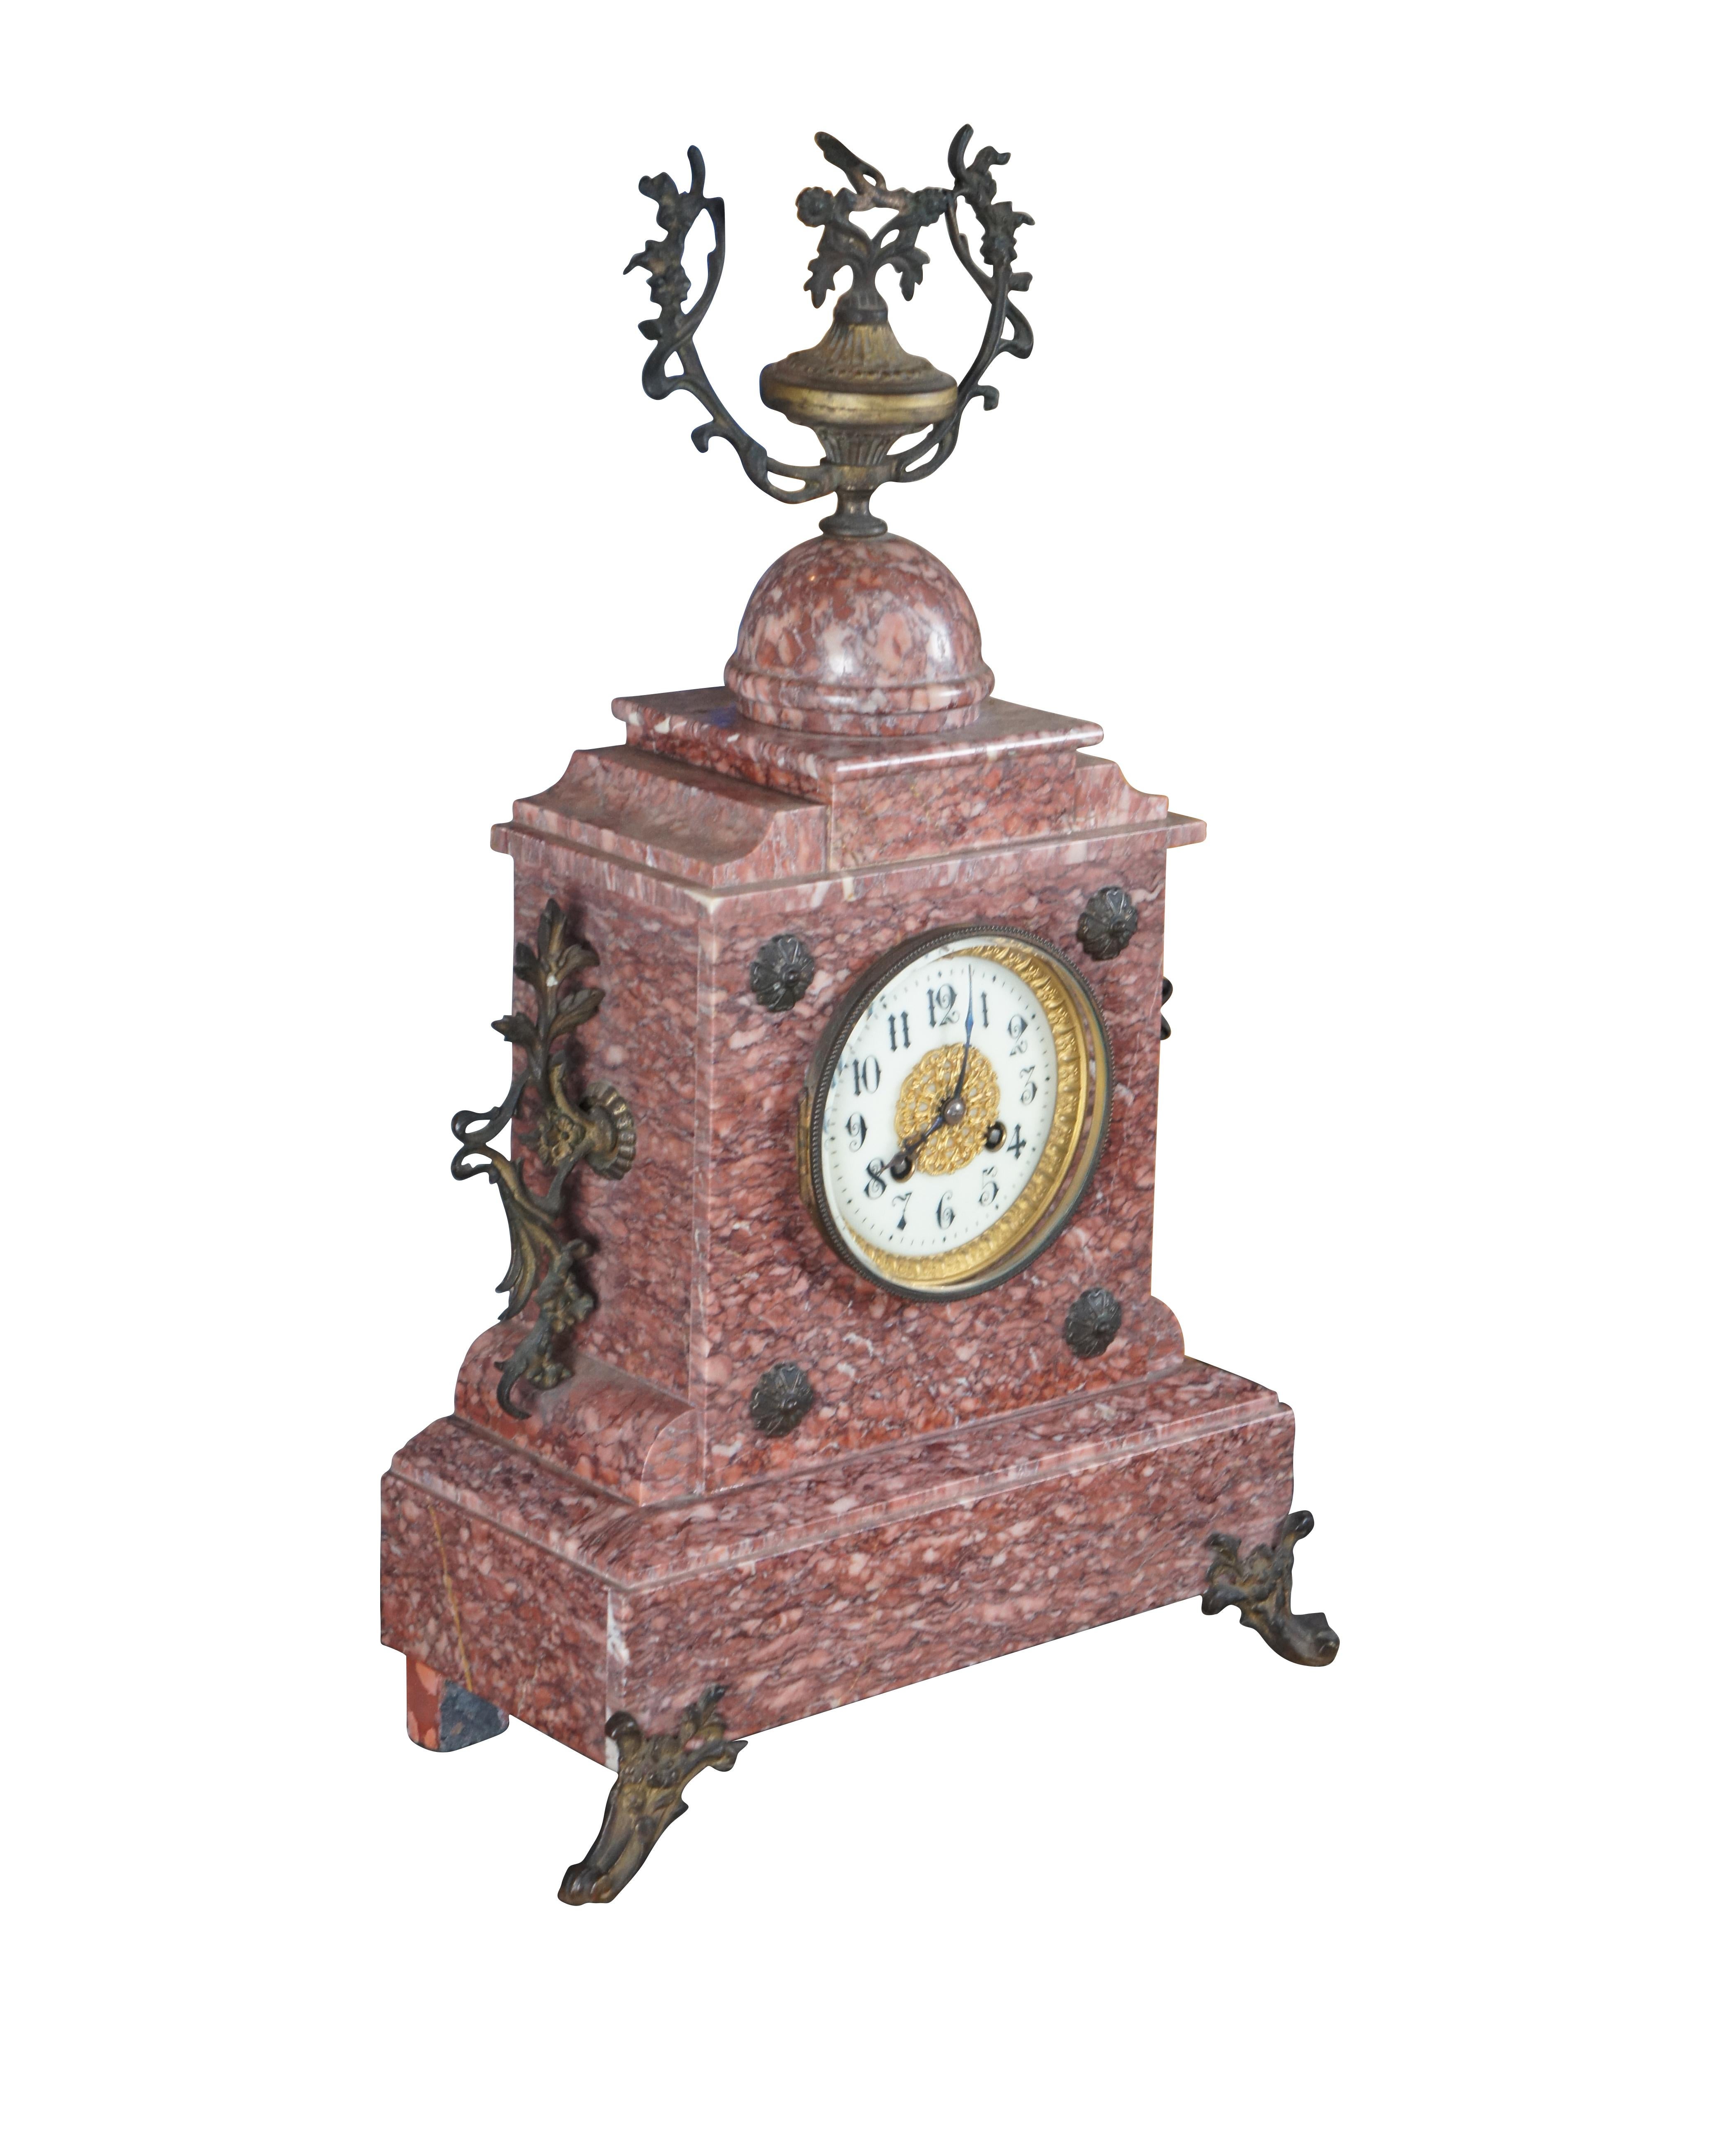 An antique 19th Century mantel Clock. Made from Rouge marble with bronze ormolu. Ornately designed with gold filigree face, a stepped base, footed over downswept legs. Features ornate medallions along the front and bronze motifs.

Dimensions:
12.5